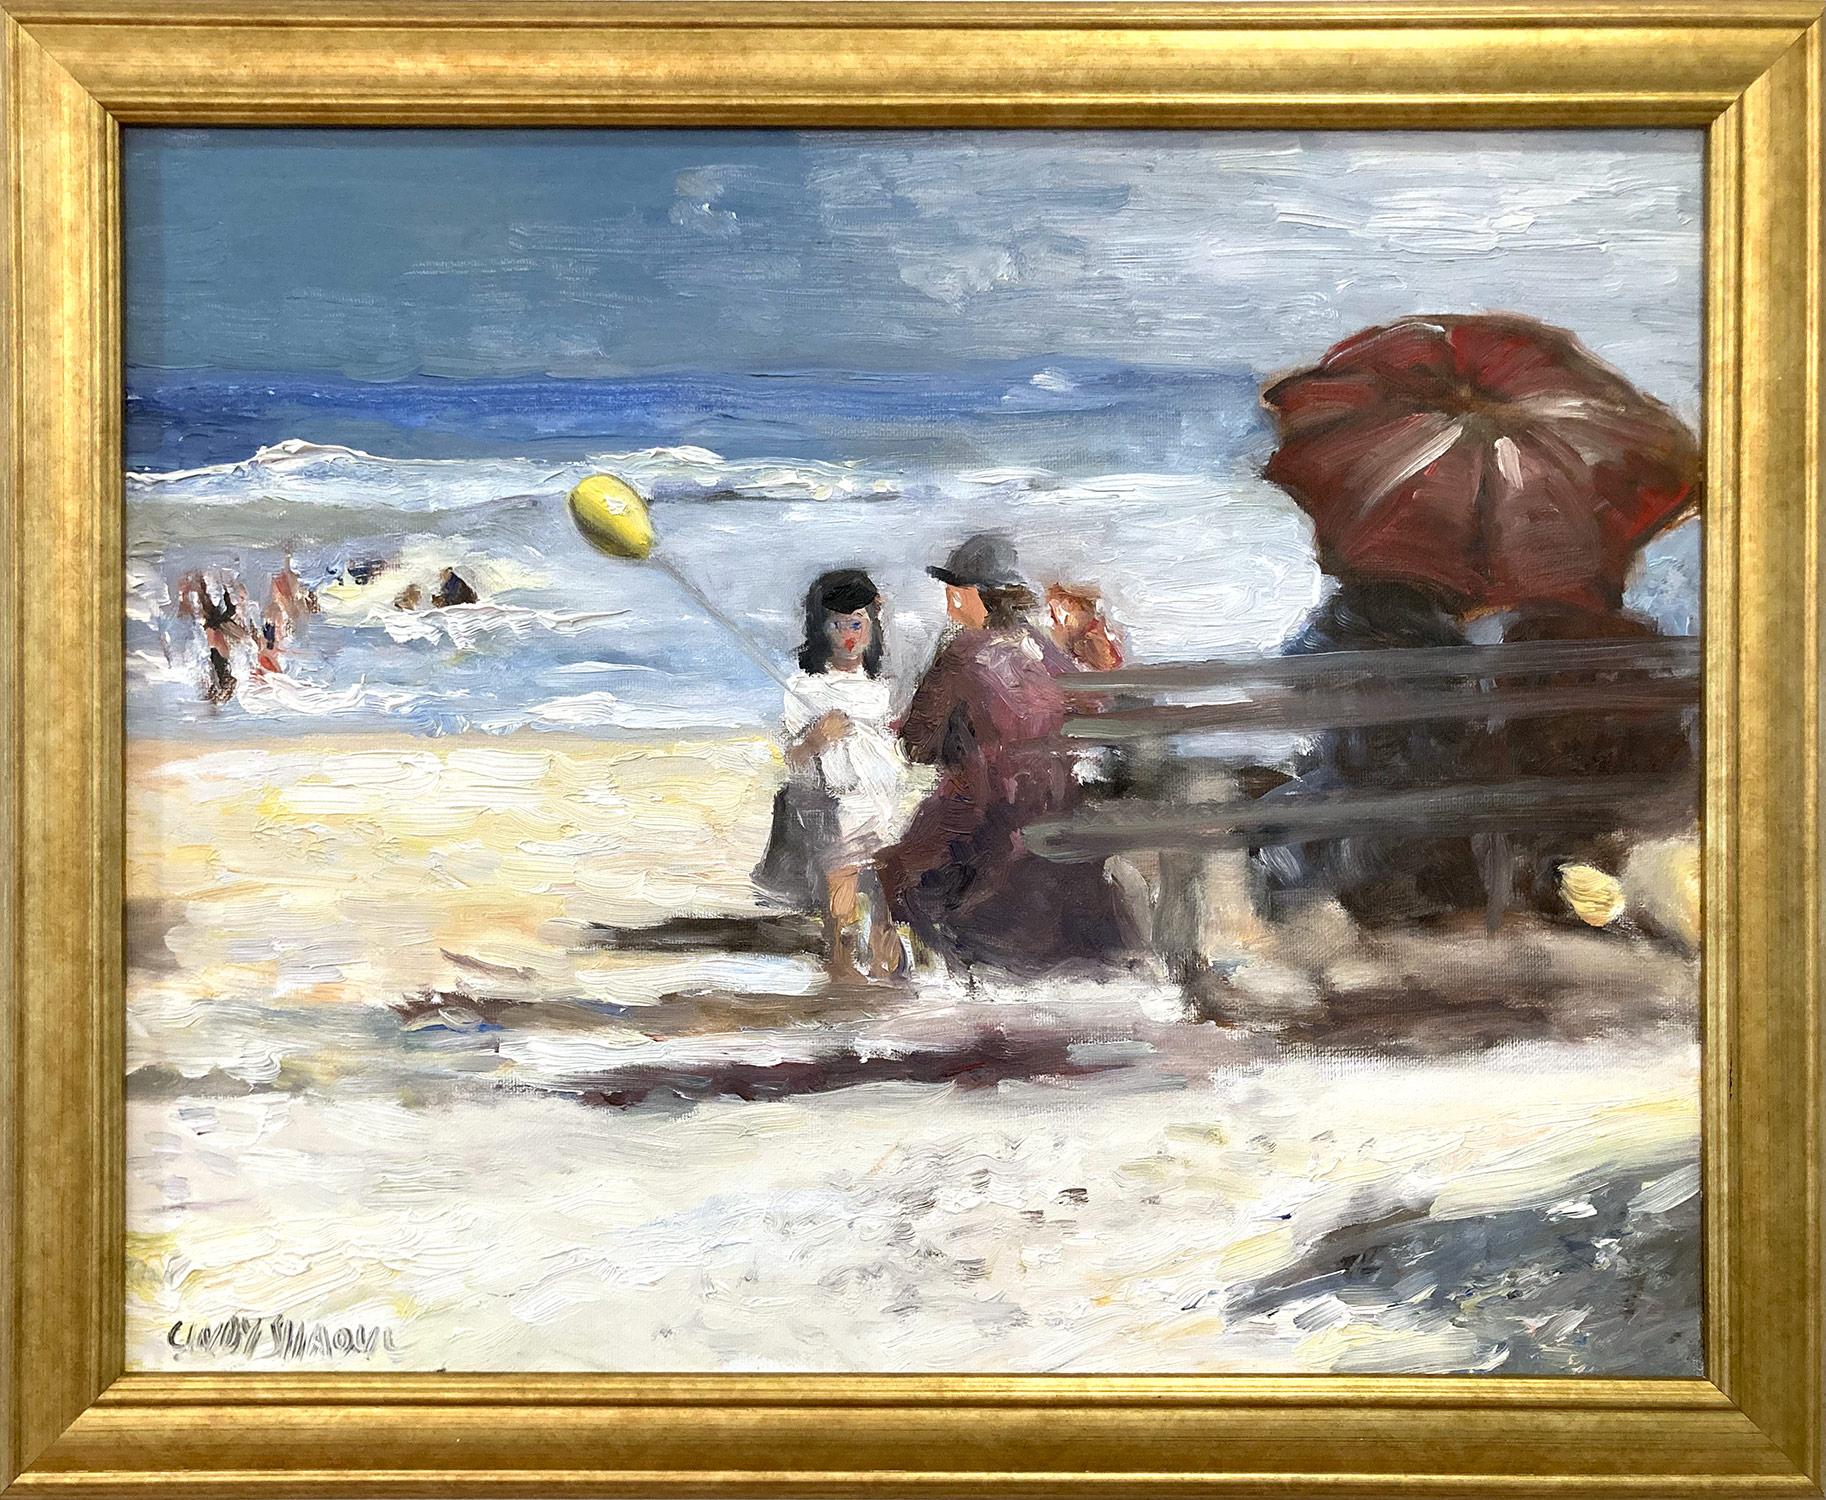 Cindy Shaoul Landscape Painting - "Kids on the Beach" Impressionistic Beach Scene in Style of Edward Potthast 